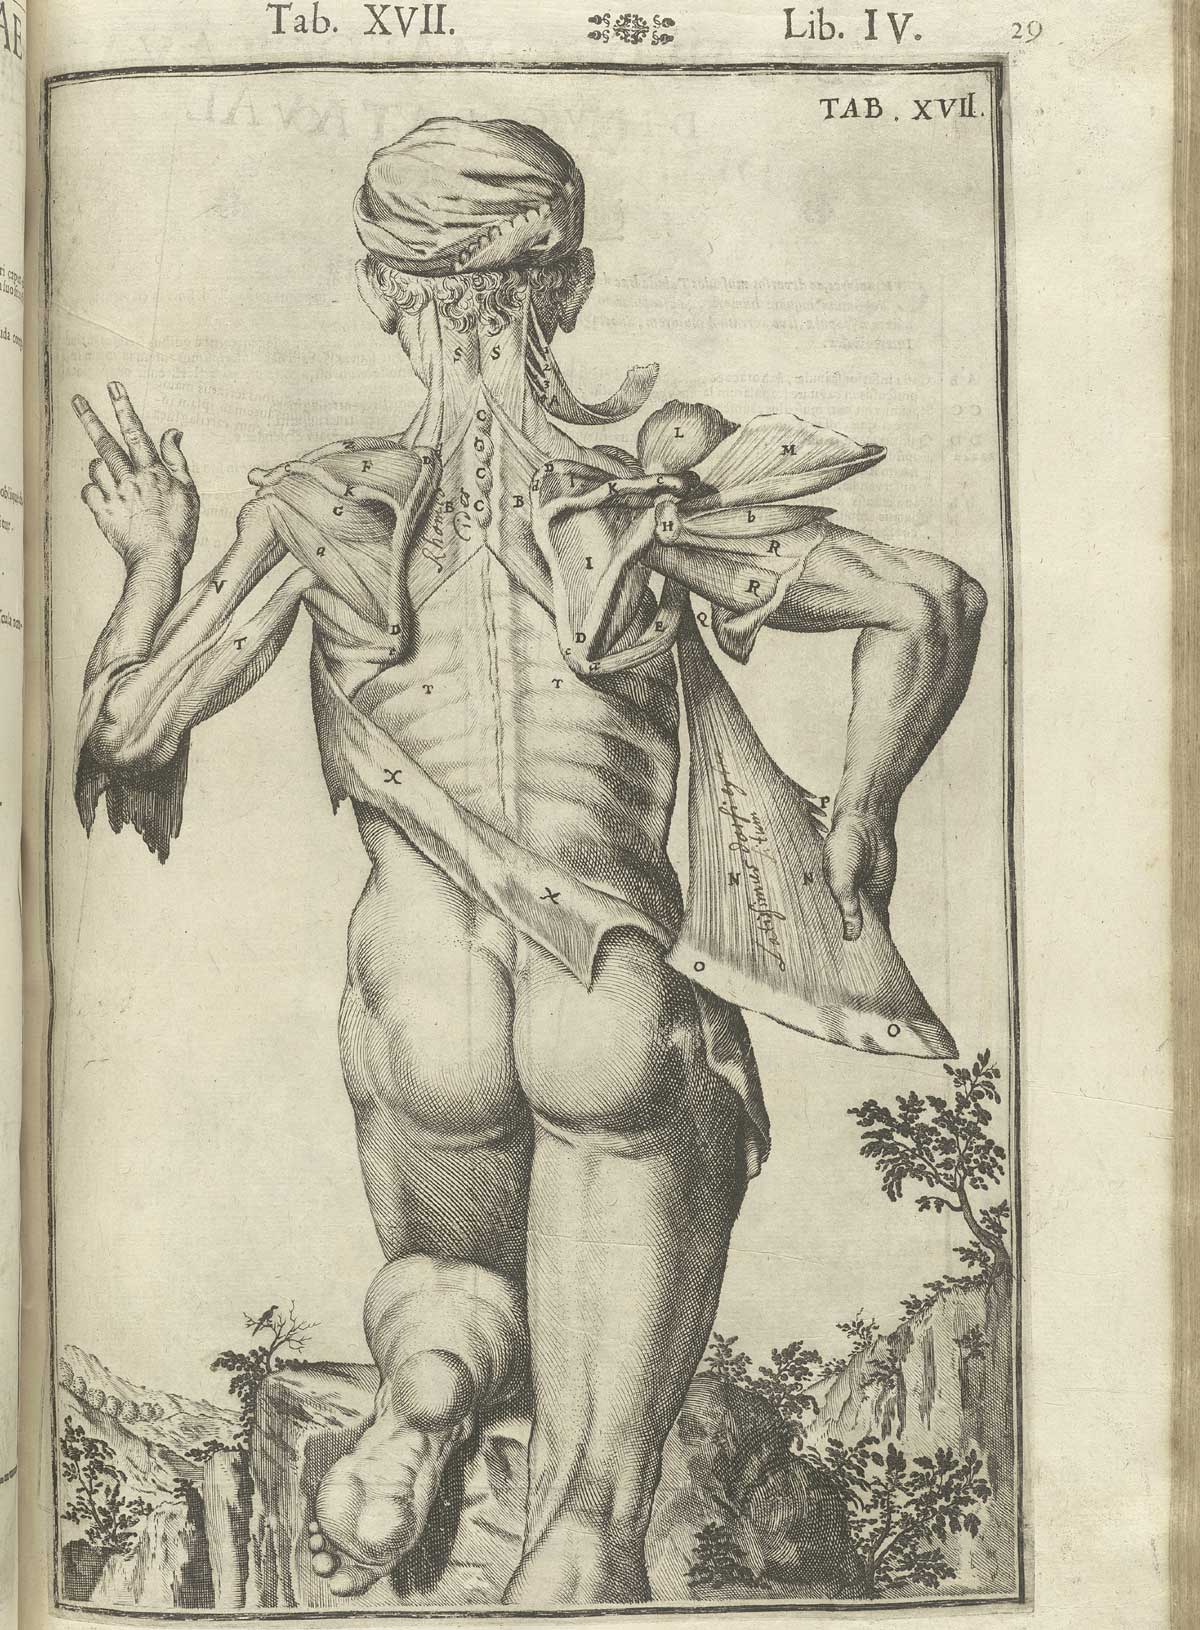 Engraving showing a nude male anatomical figure in a pastoral setting standing with his back to the viewer especially revealing the deltoids, trapezius, and latissimus dorsi muscles, with the rest of his skin pulled away from his back revealing other musculature; from Adriaan van de Spiegel and Giulio Cassieri’s De humani corporis fabrica libri decem, Venice, 1627, NLM call no. WZ 250 S755dh 1627.